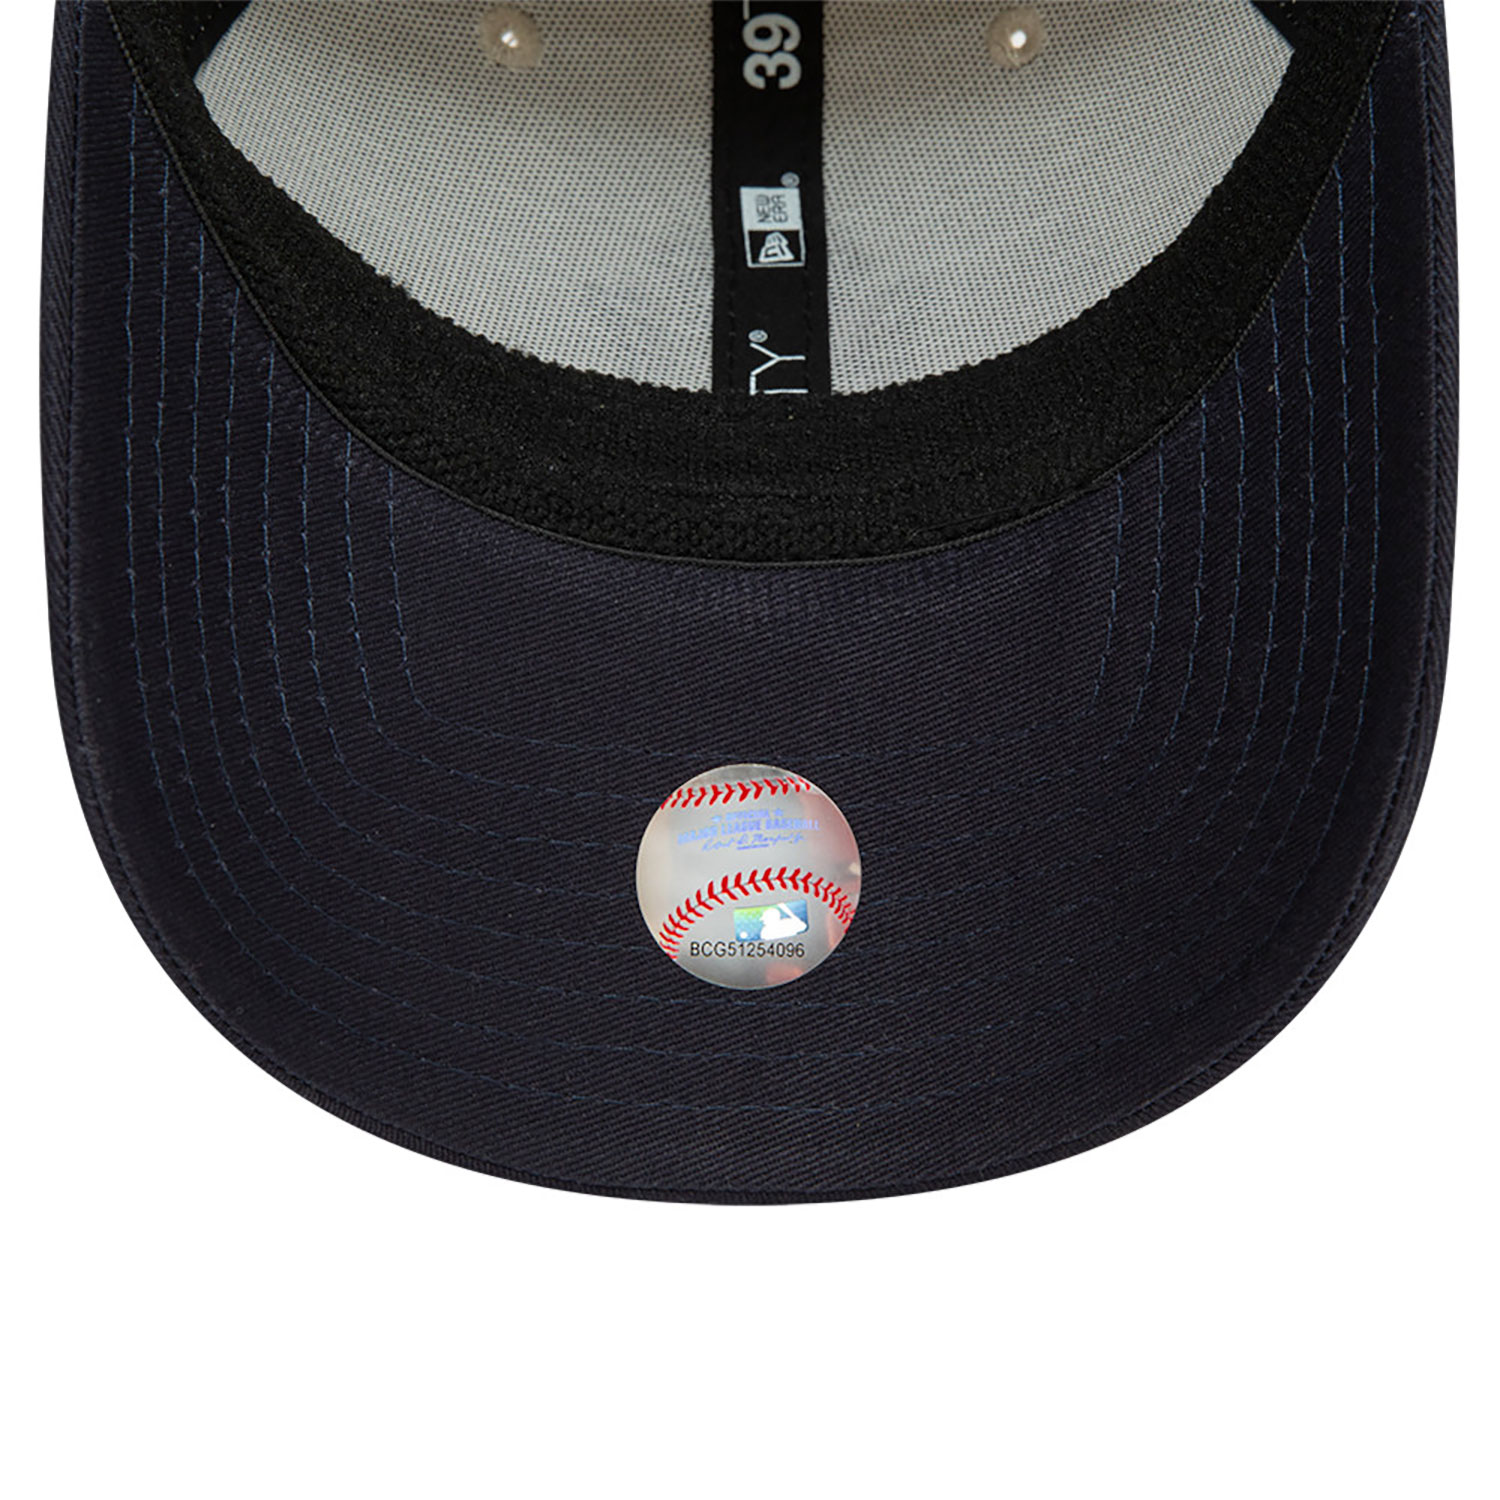 New York Yankees MLB Contrast Crown Light Beige 39THIRTY Stretch Fit Cap